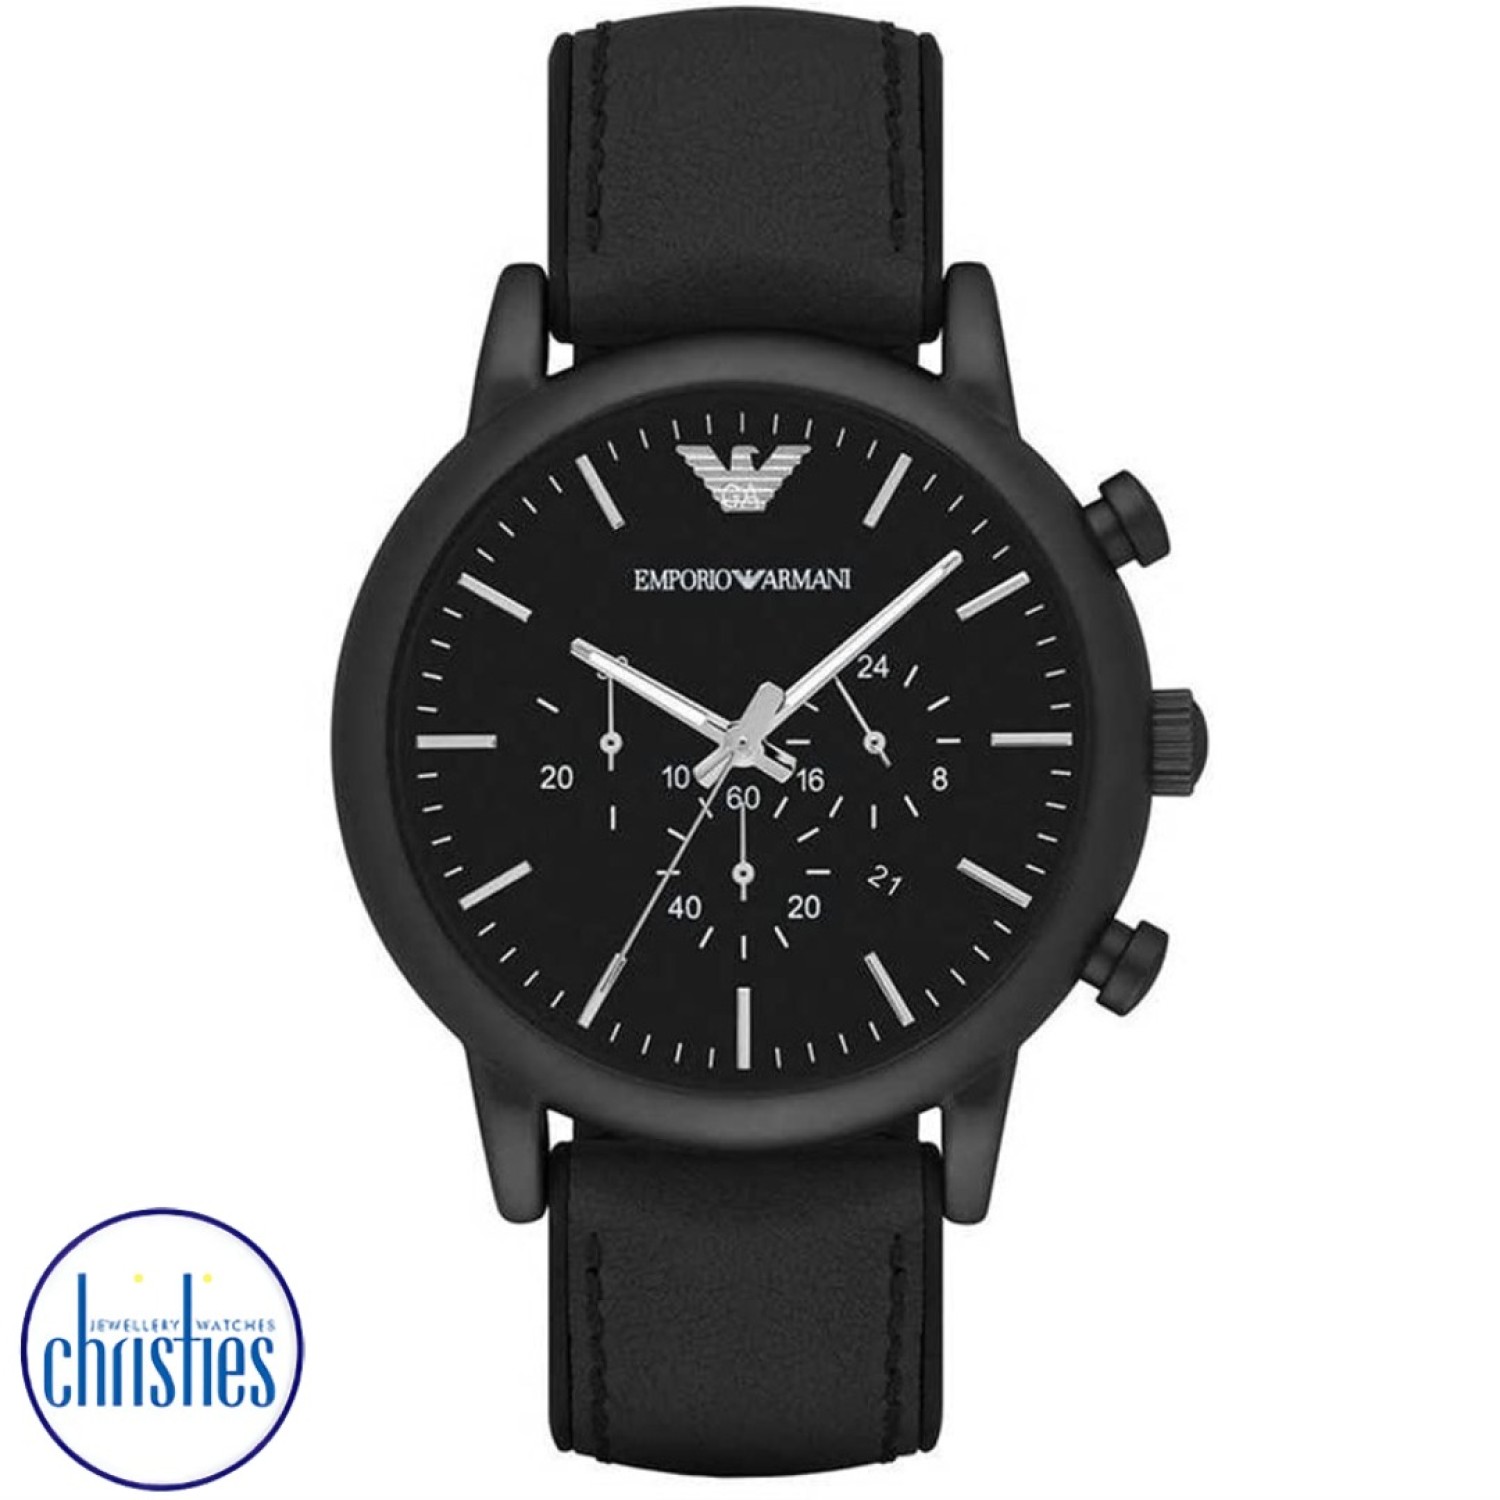 AR1970 Emporio Armani Mens Chronograph Watch. This sporty Emporio Armani watch features a matte black chronograph dial, matte black IP case and silicone-backed black leather strap.3 Months No Payments and Interest for Q Card holders OXIPAY - Have it now a